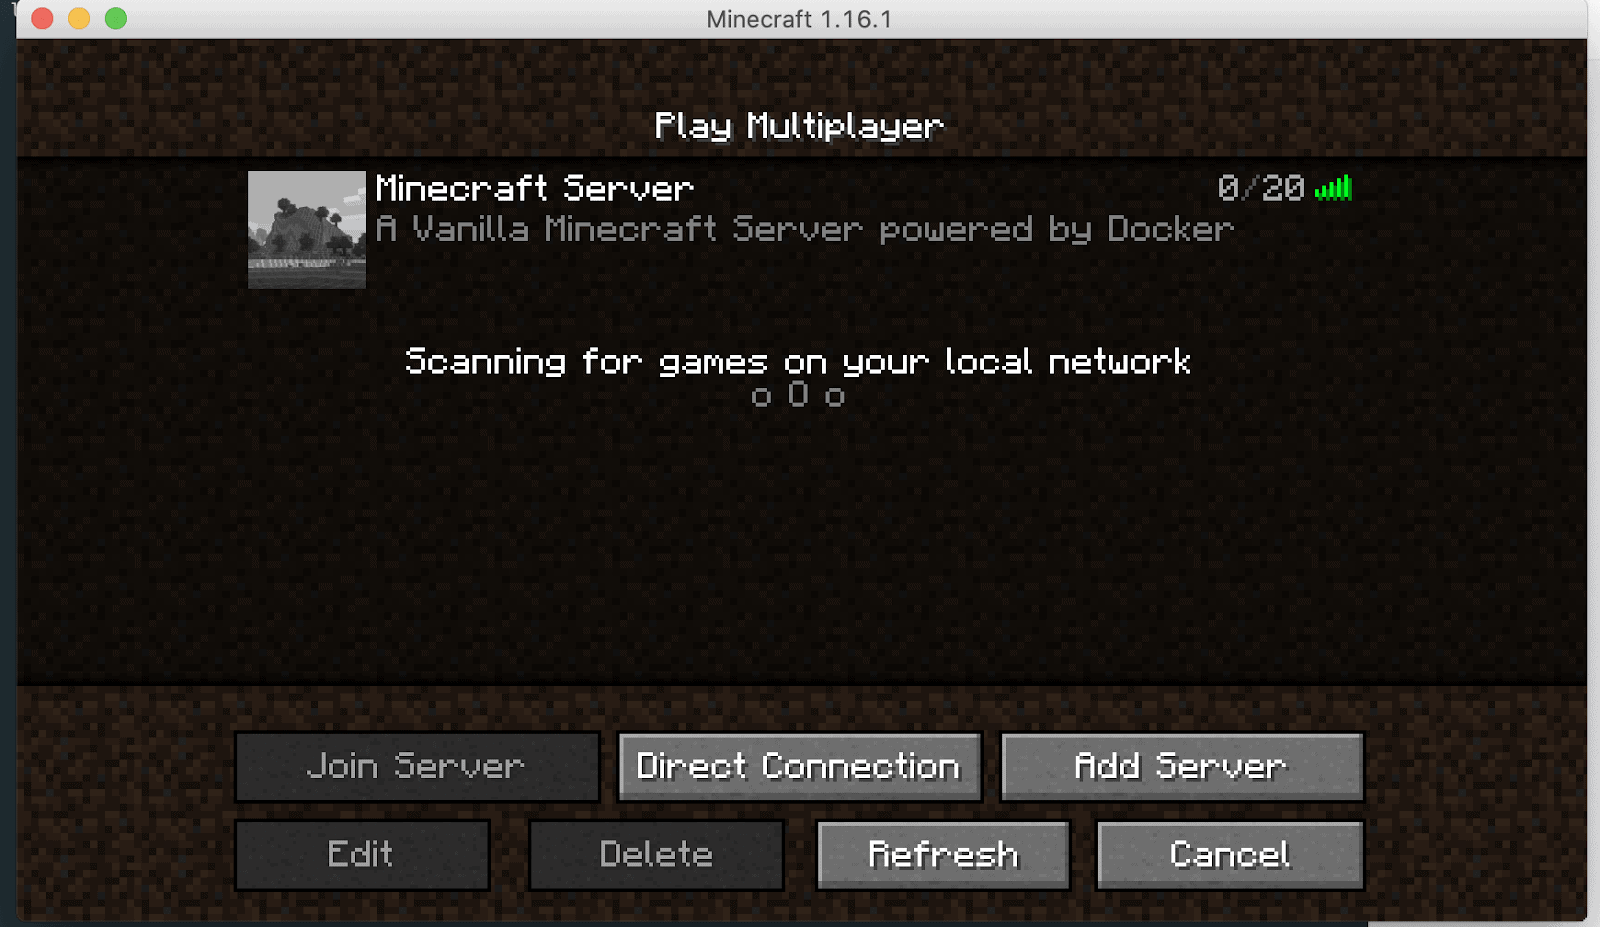 HOW TO HOST A MINECRAFT SERVER VIA YOUR LAPTOP/PC